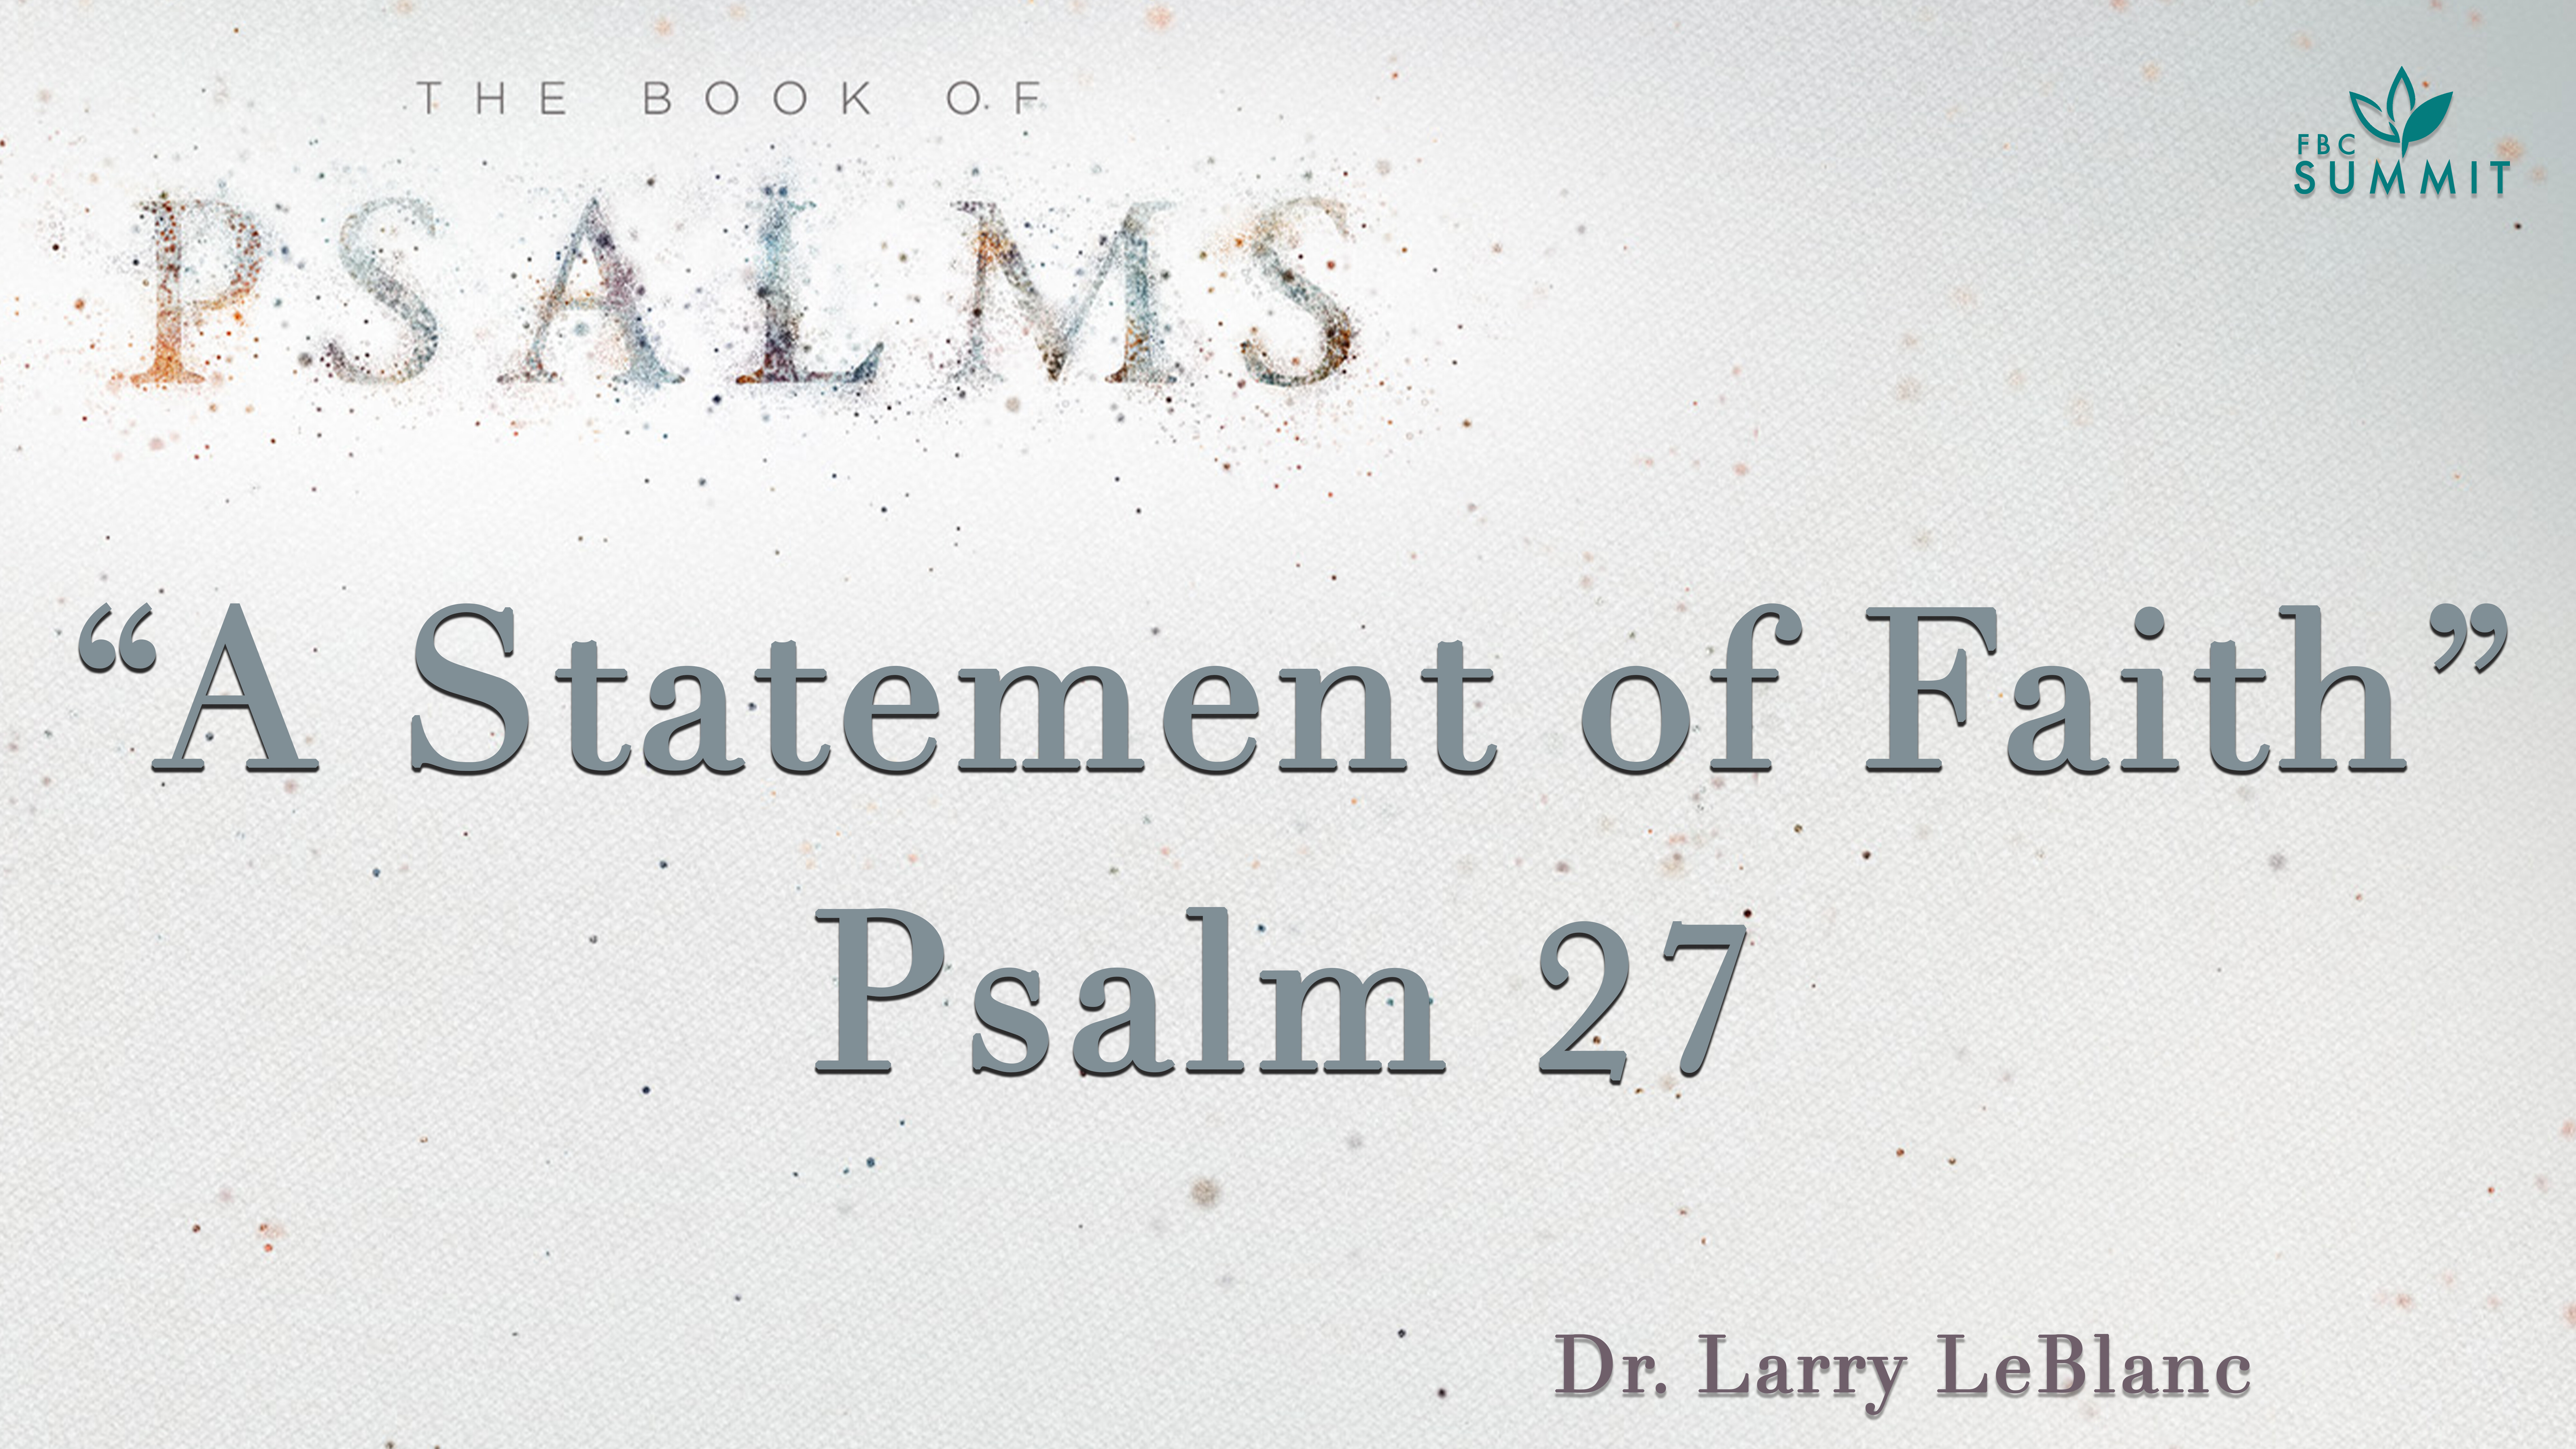 Psalm 27: A Statement of Faith